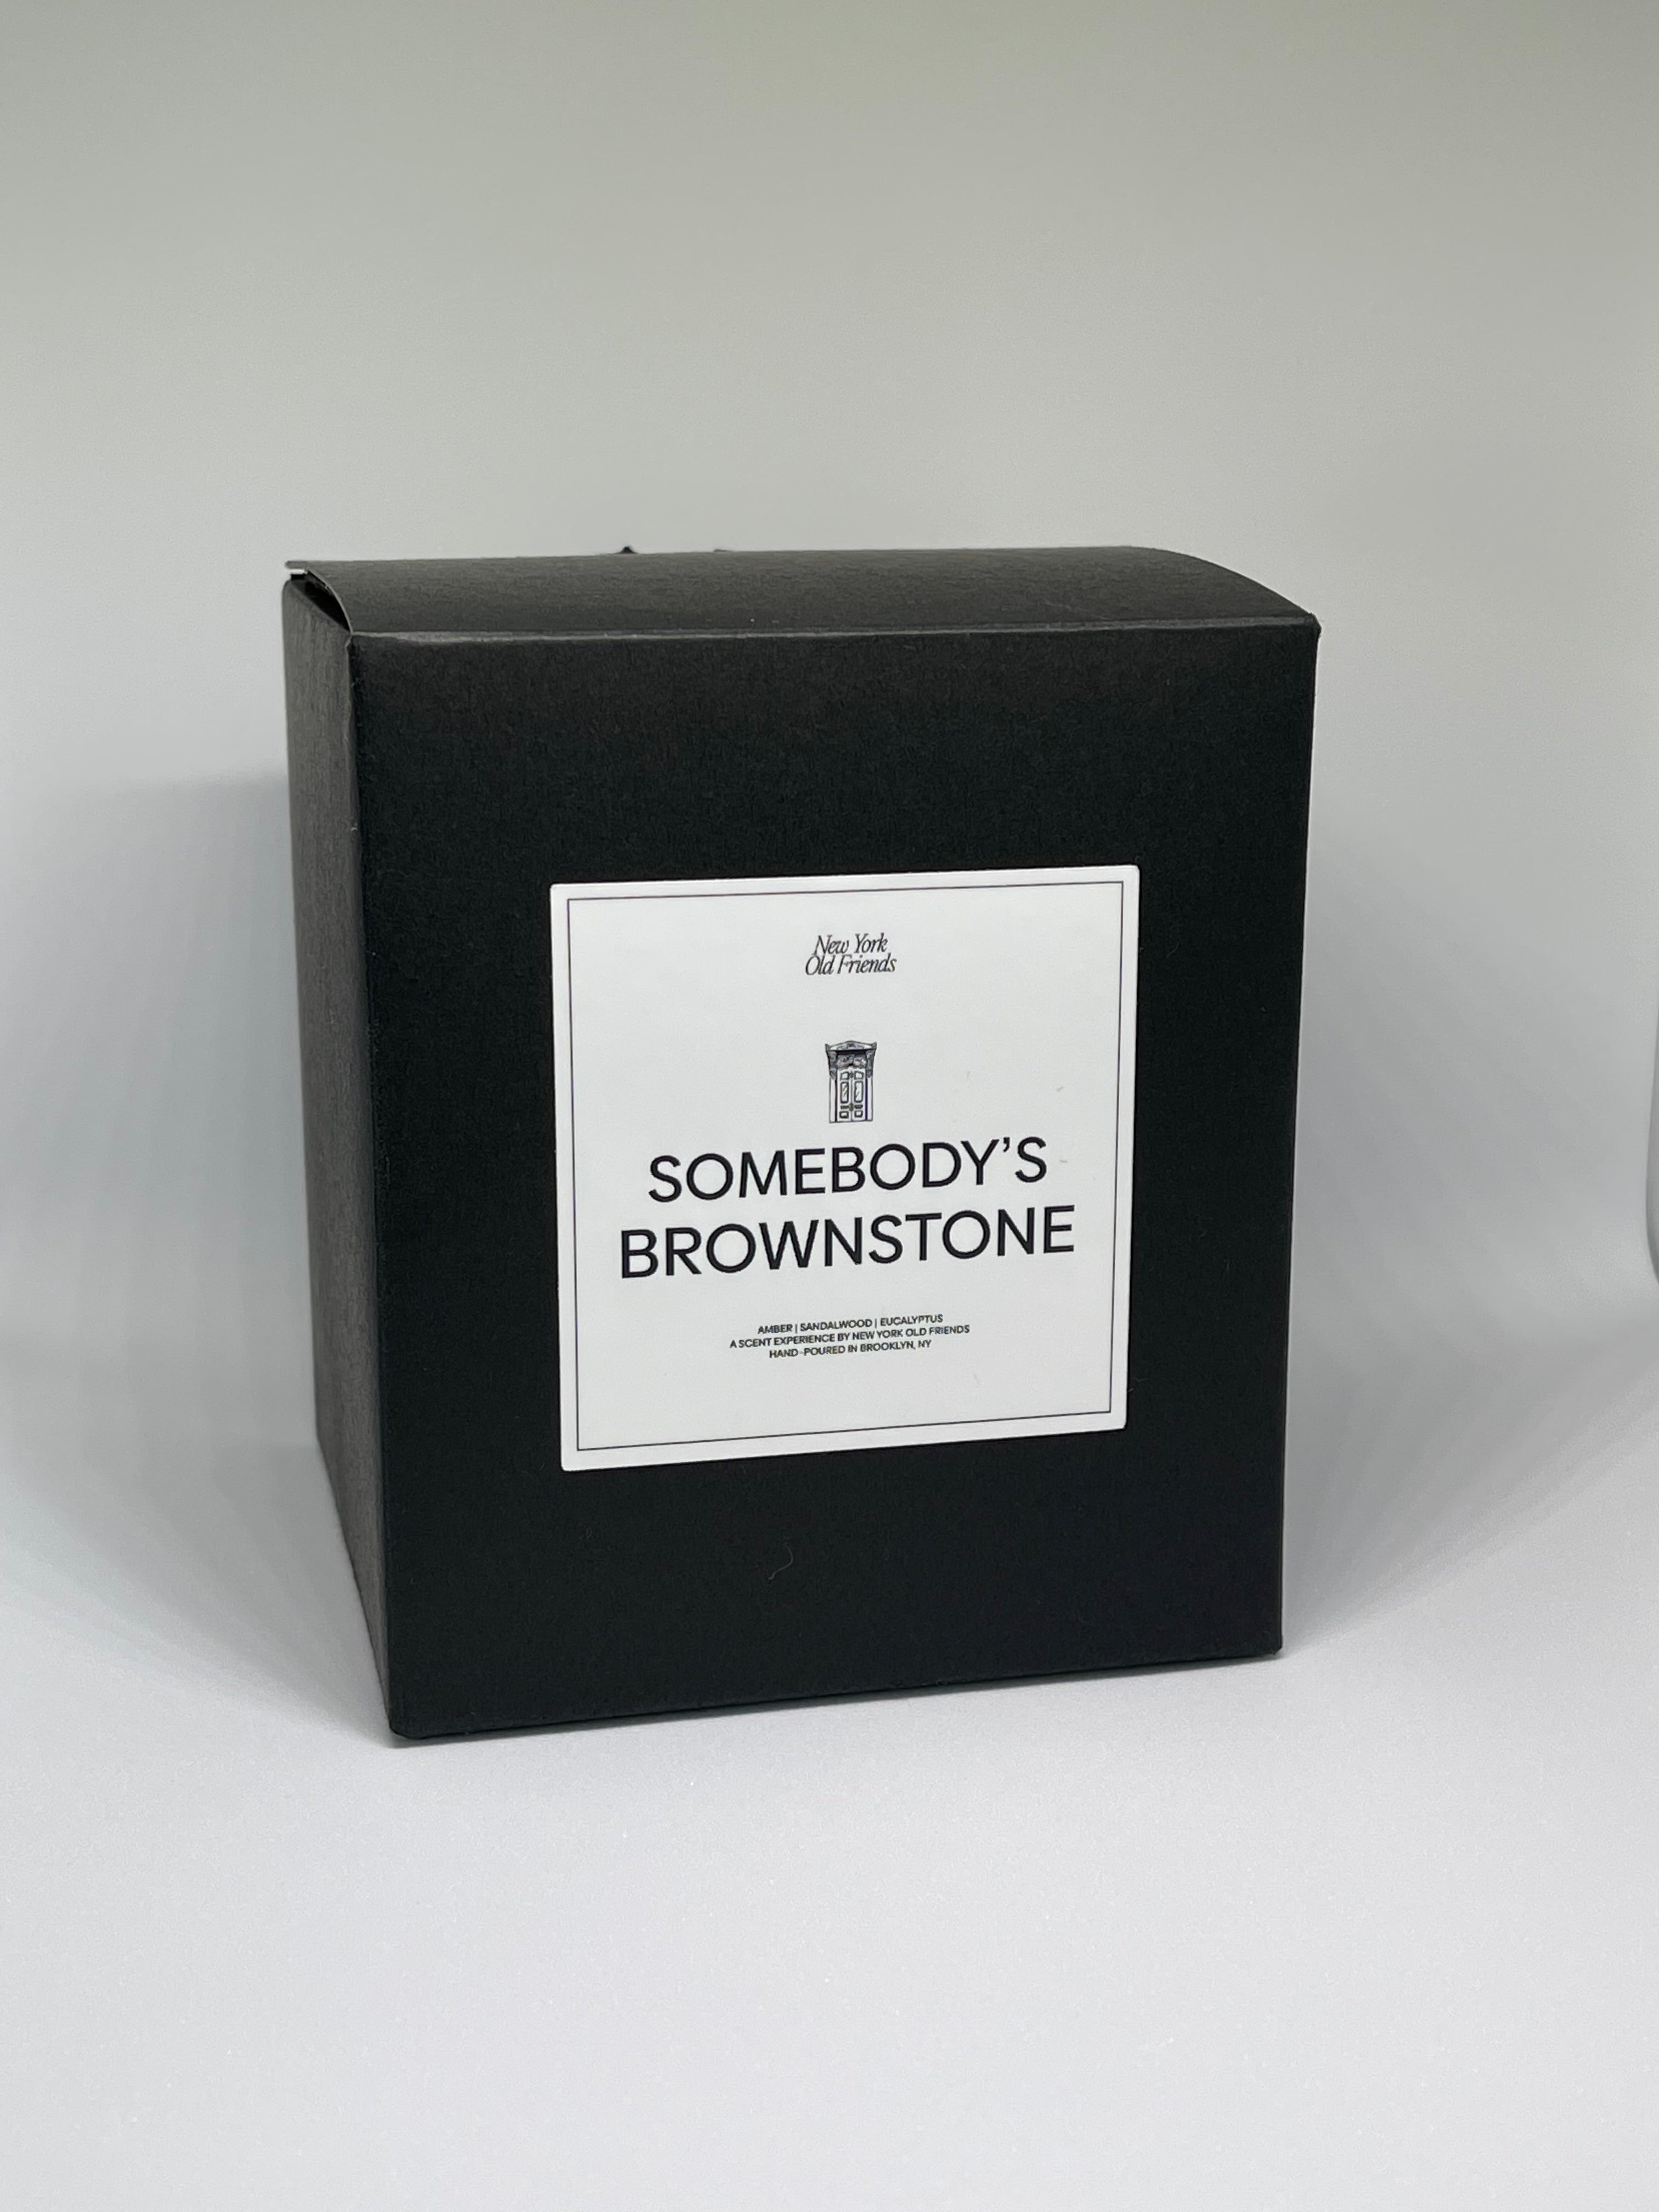 Somebody's Brownstone Candle